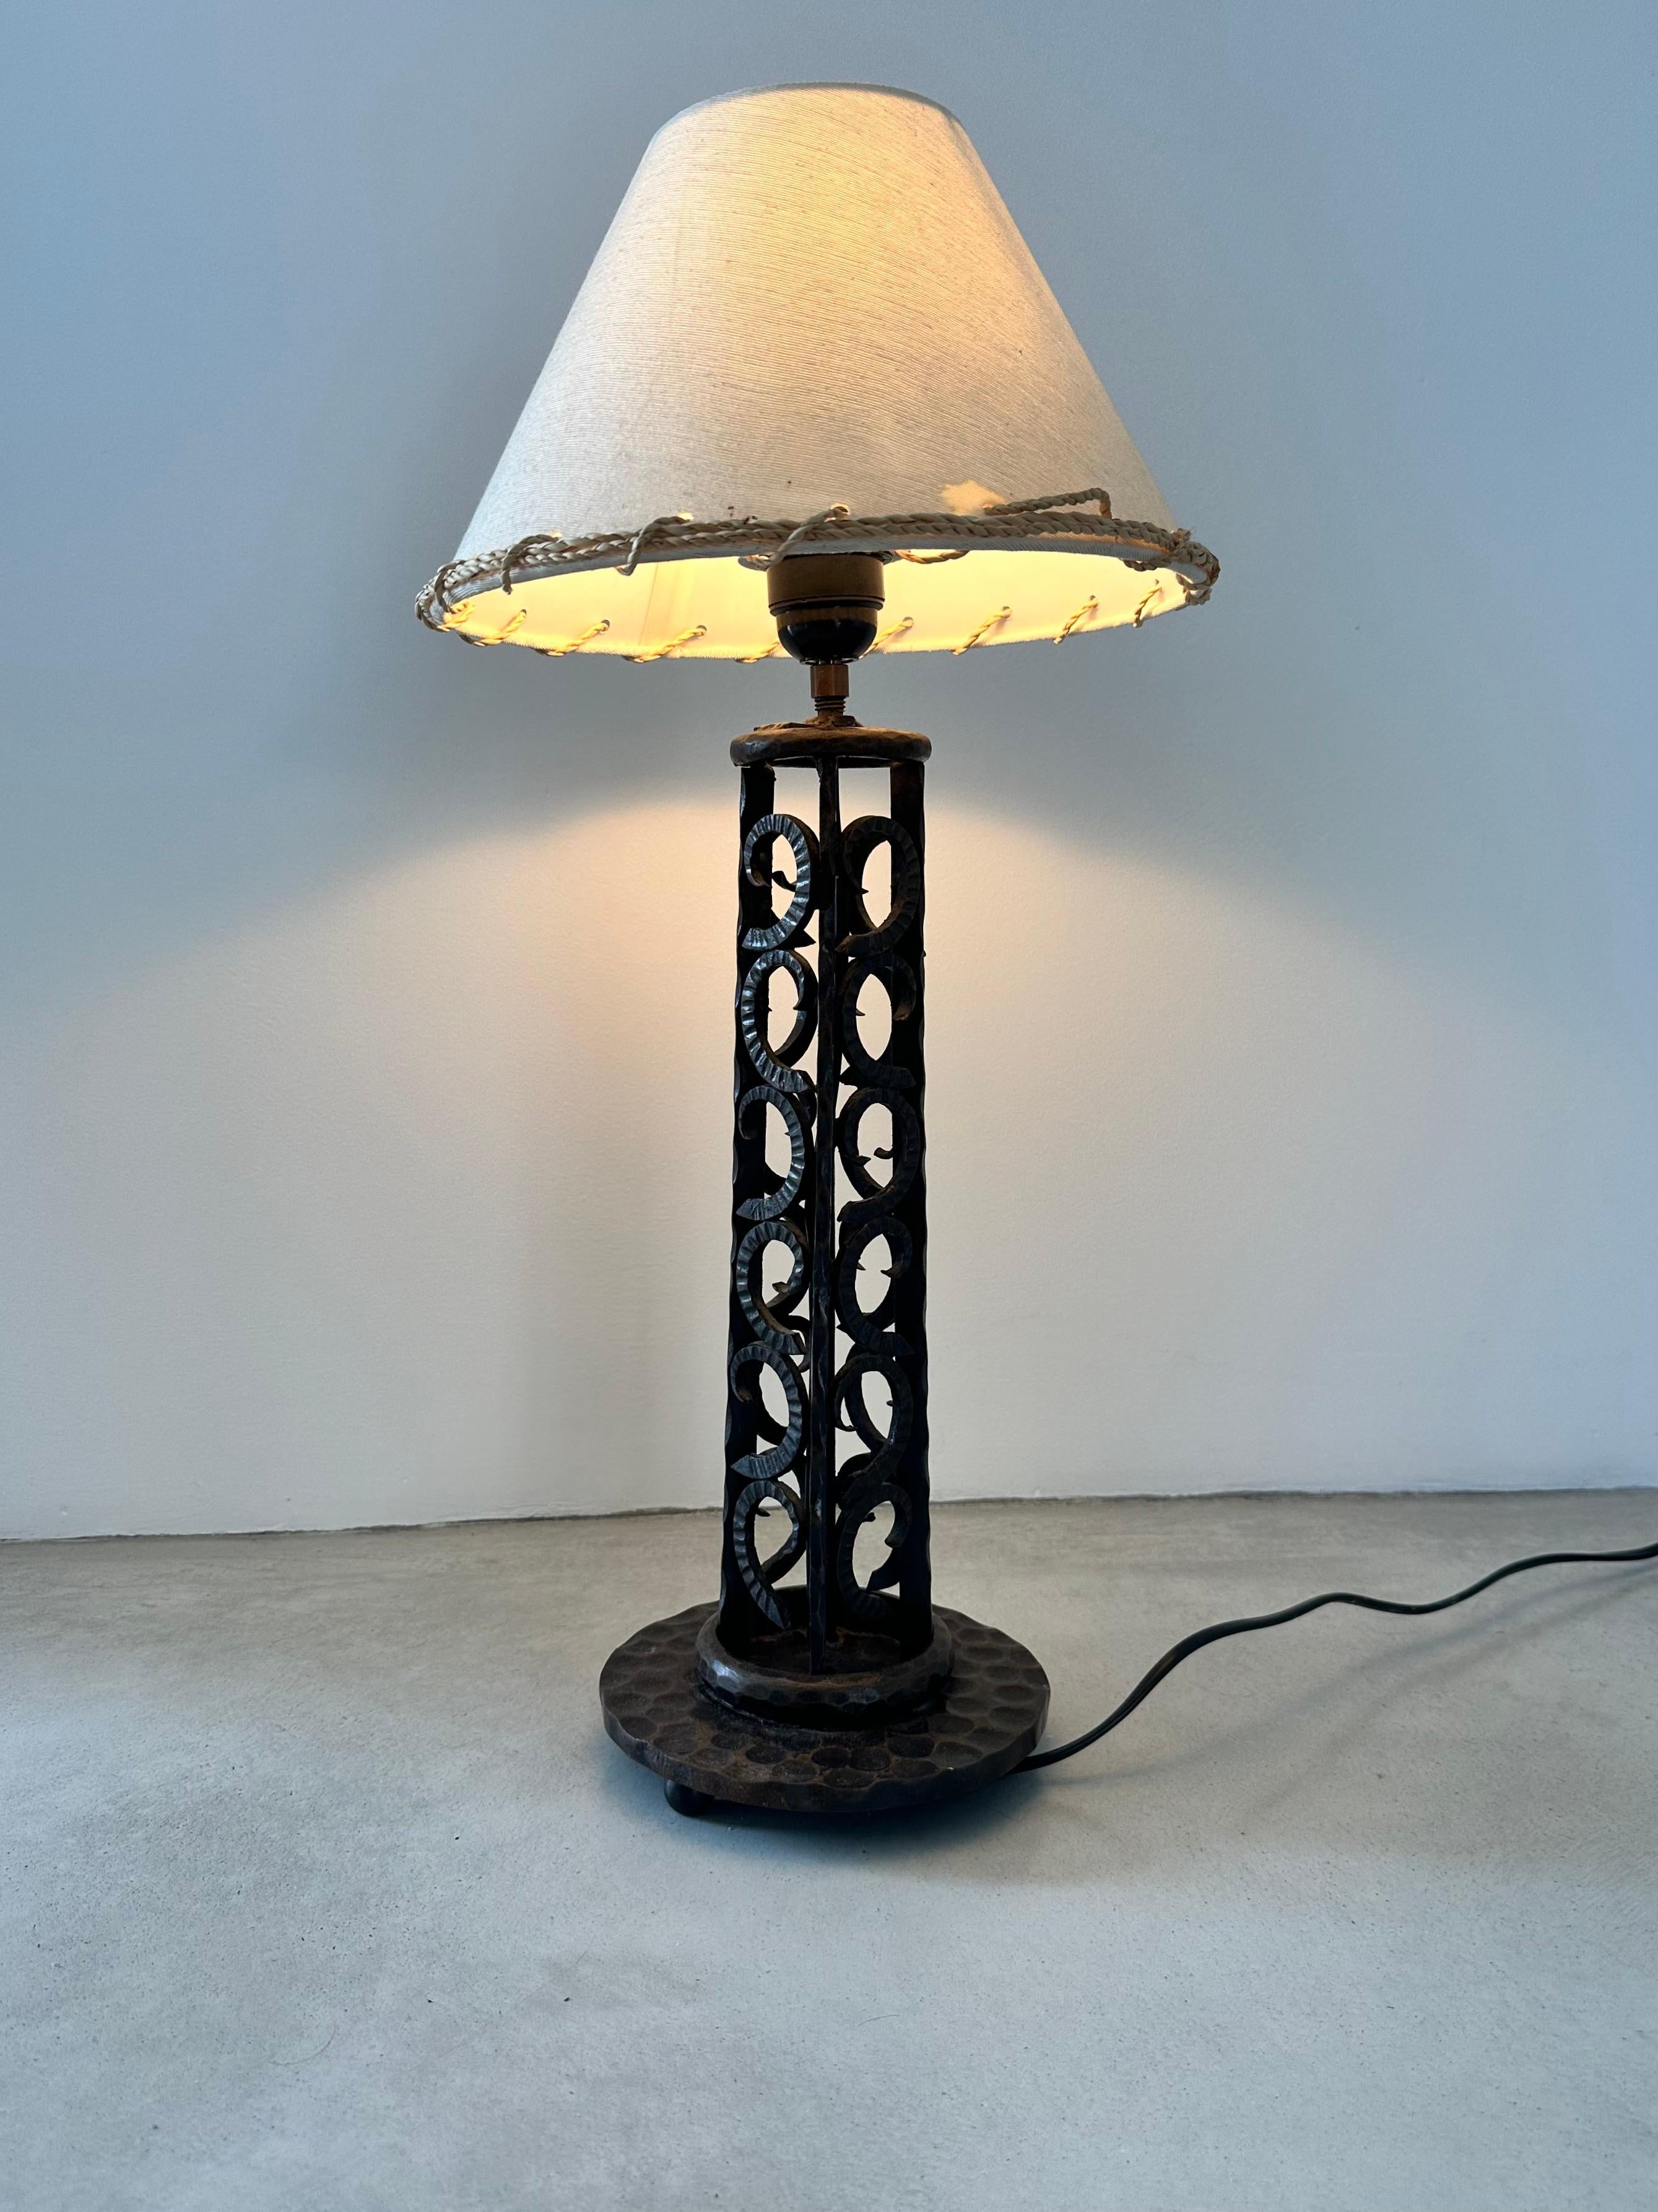 French Art Deco Wrought-iron table lamp.

Beautiful handmade ironwork, very elaborate.

Height excluding lampshade 36 cm / 14,17 inch

Circular base with a diameter of 16 cm / 6,3 inch

For sale without the lampshade

Good Condition.

Circa 1930s